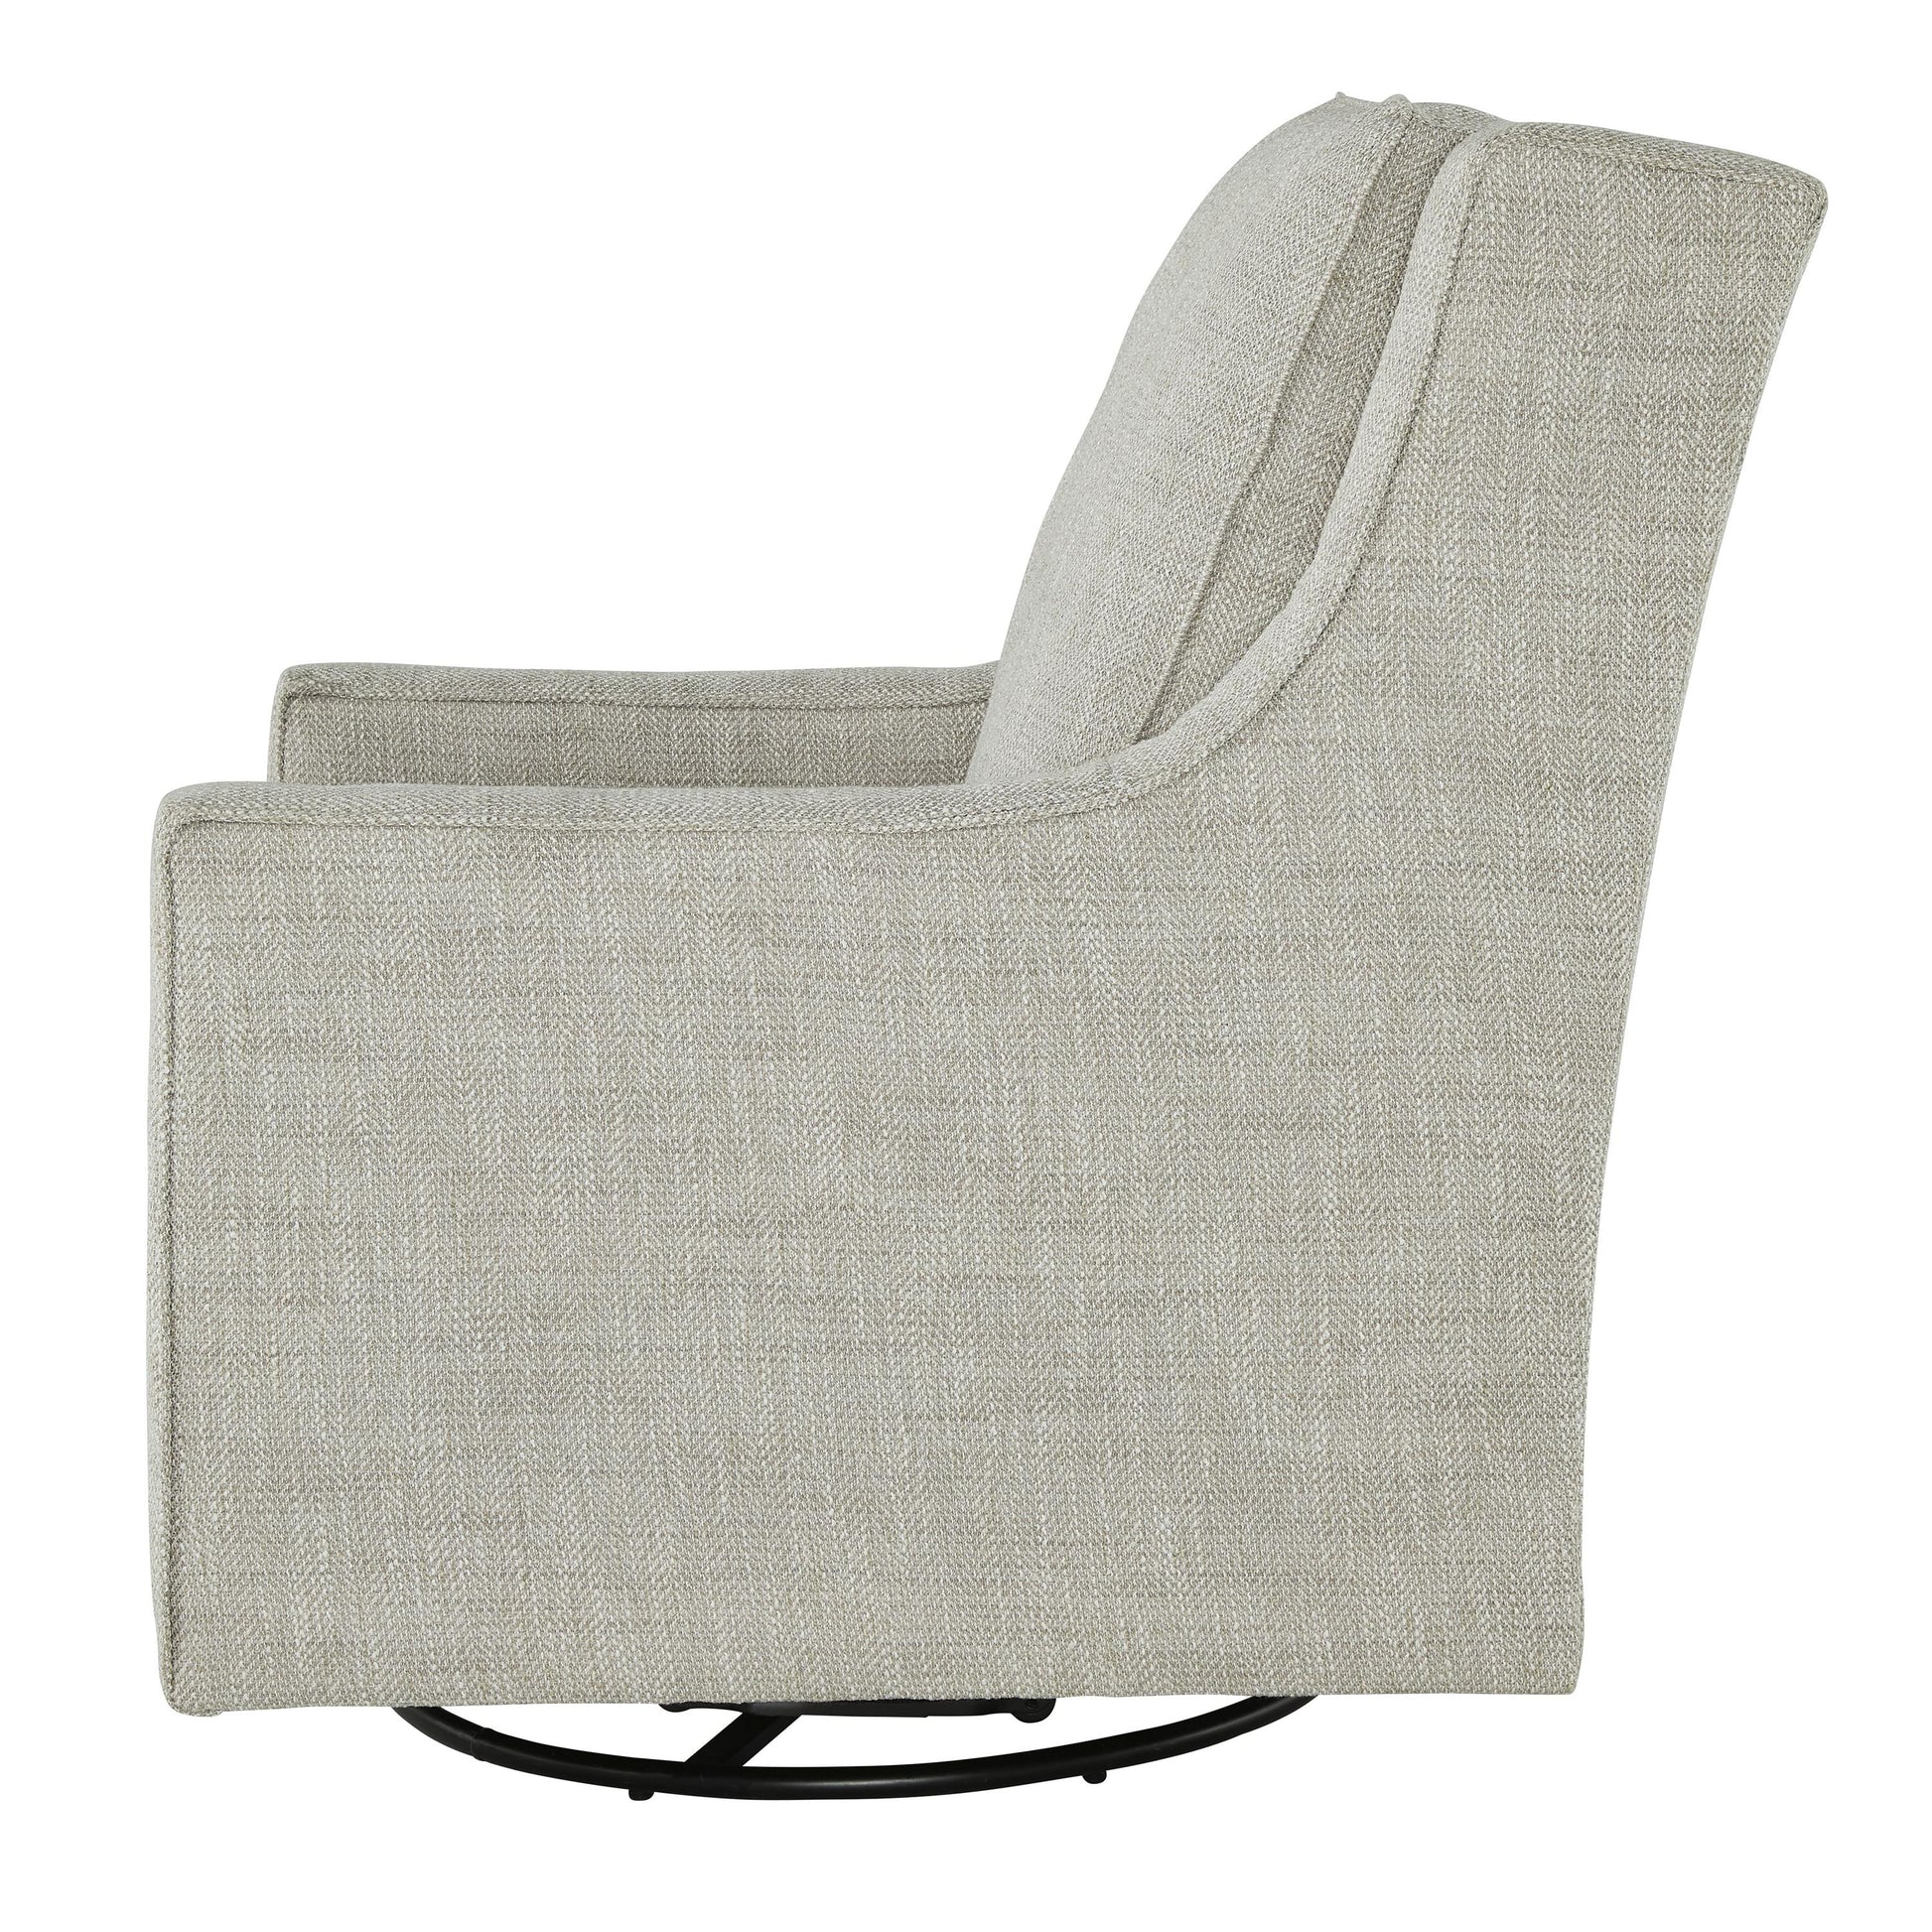 Signature Design by Ashley Kambria Swivel Glider Fabric Accent Chair A3000265 IMAGE 3